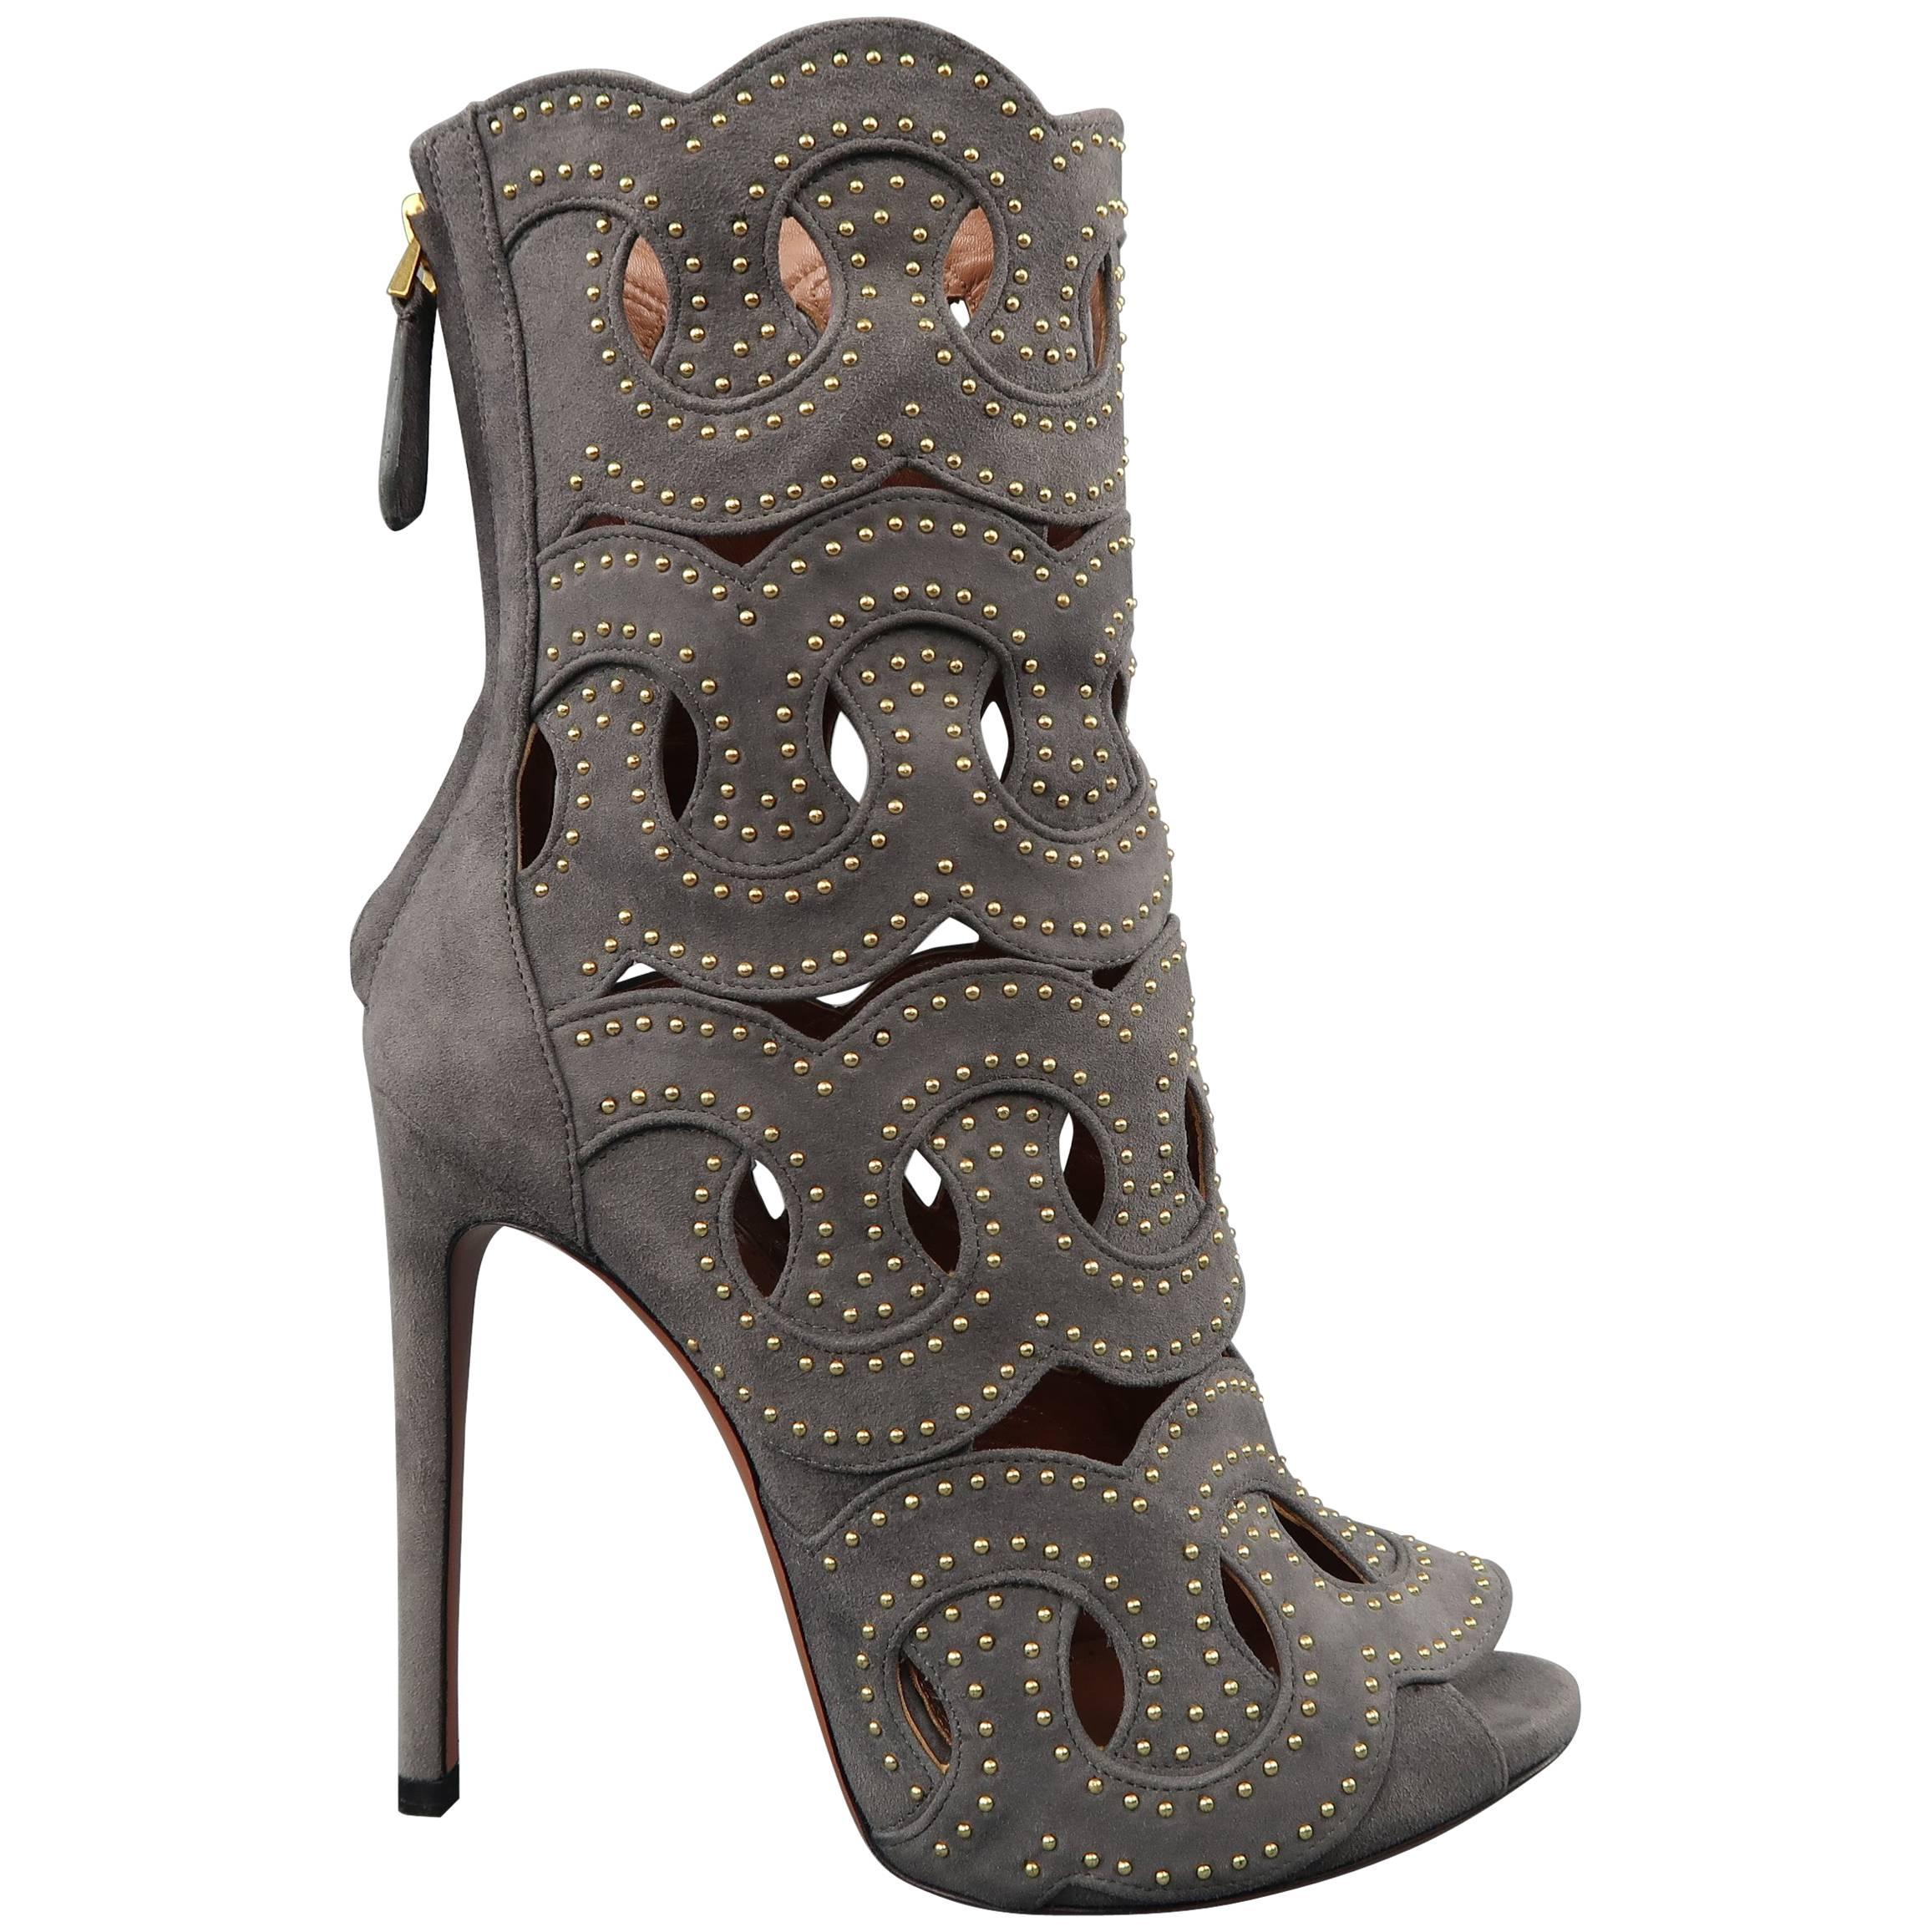 ALAIA Size 8.5 Gray Studded Cutout Suede Ankle Peep Toe Boots